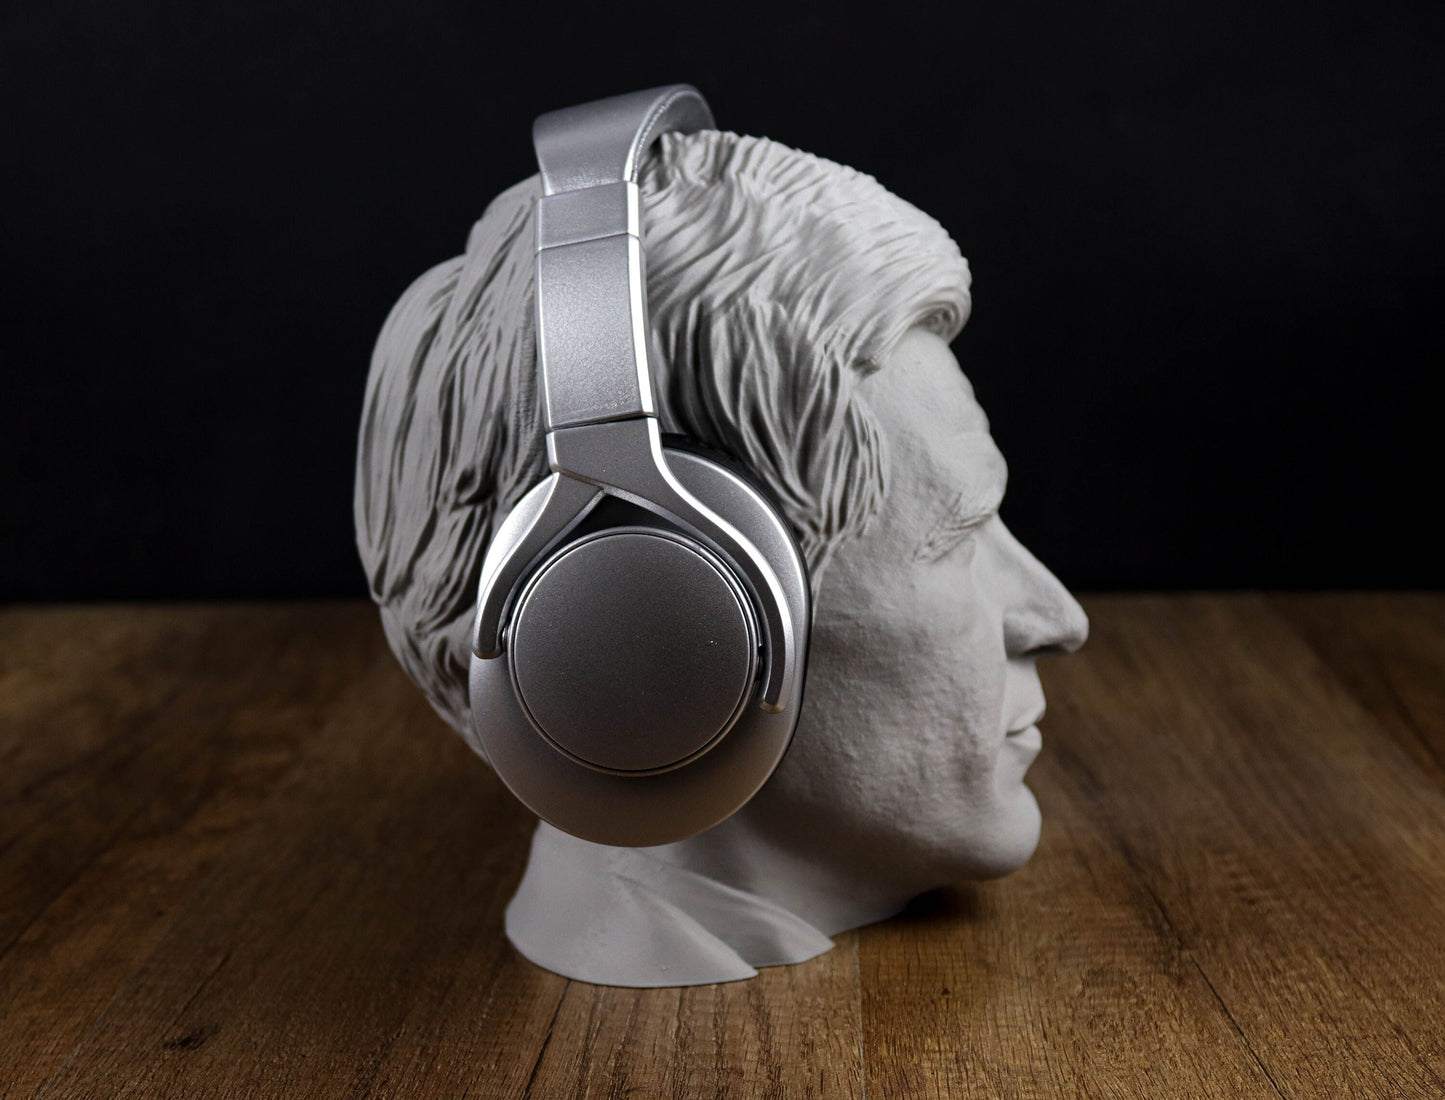 Harrison Ford Headphone Holder, Headset Stand, Bust, Sculpture, Decoration Active